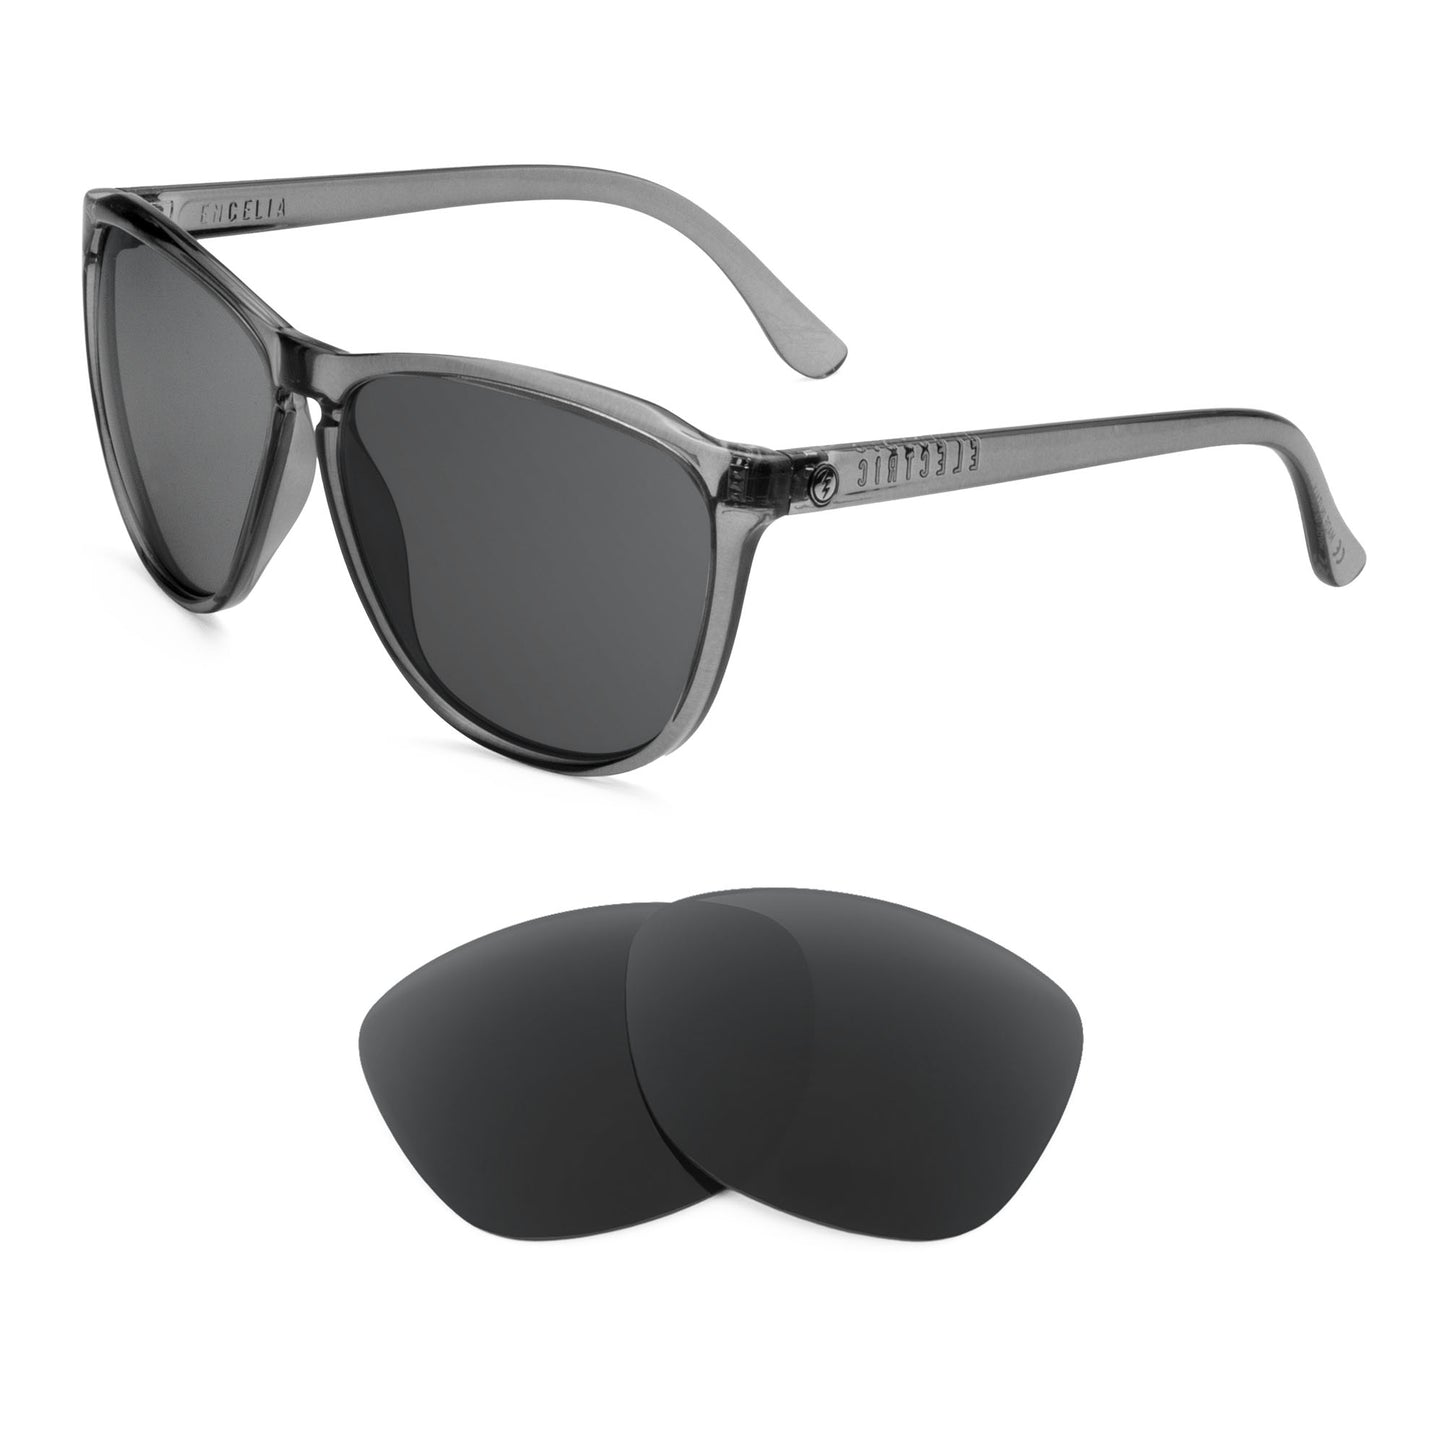 Electric Encelia sunglasses with replacement lenses